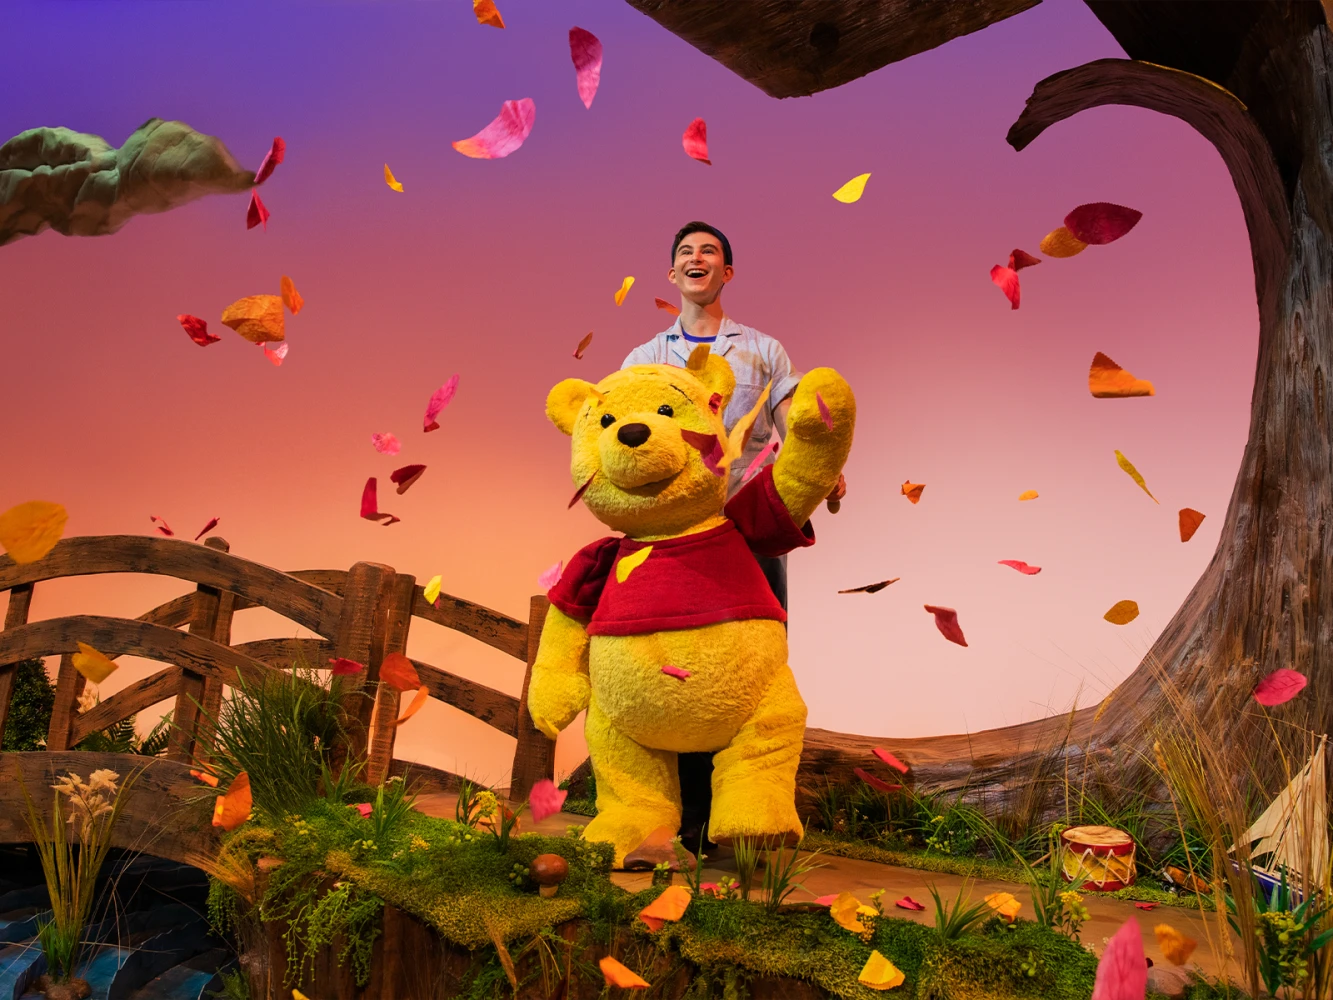 Winnie The Pooh - The Musical: What to expect - 2